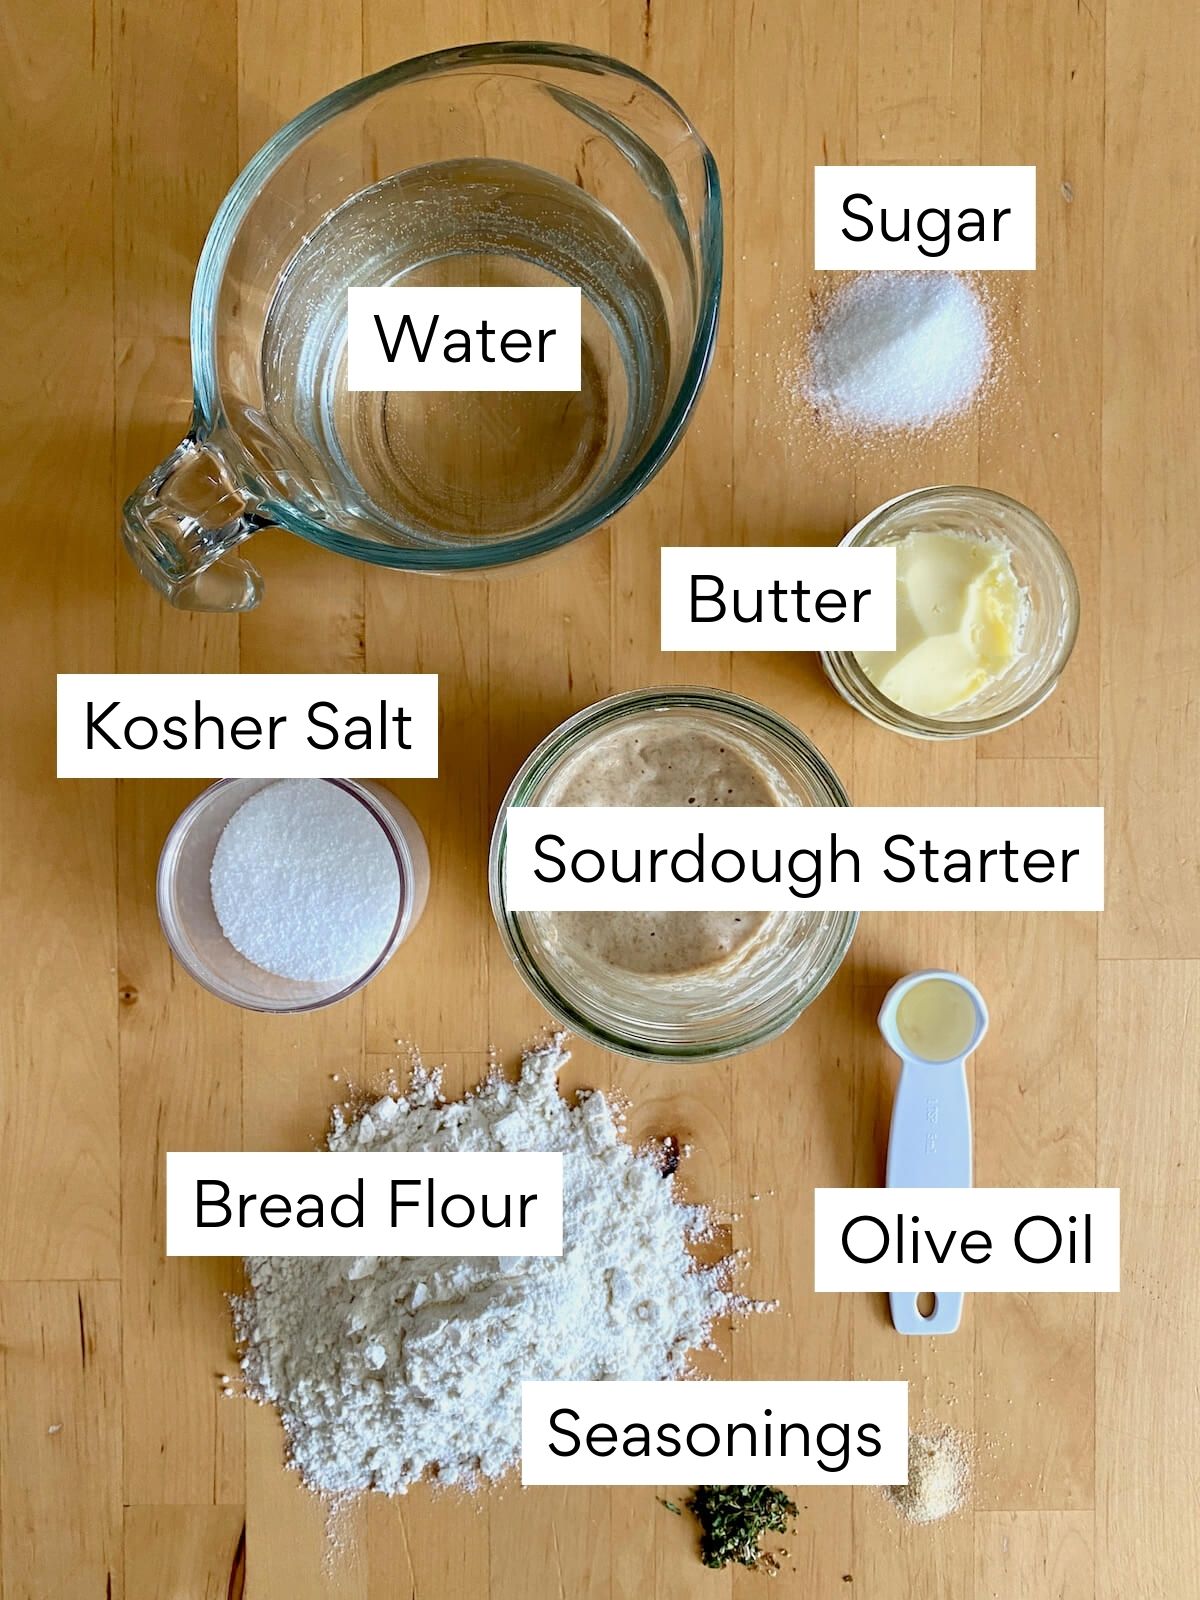 The ingredients to make sourdough breadsticks. Each ingredient is labeled with text. They include water, sugar, kosher salt, butter, sourdough starter, bread flour, olive oil, and seasonings.